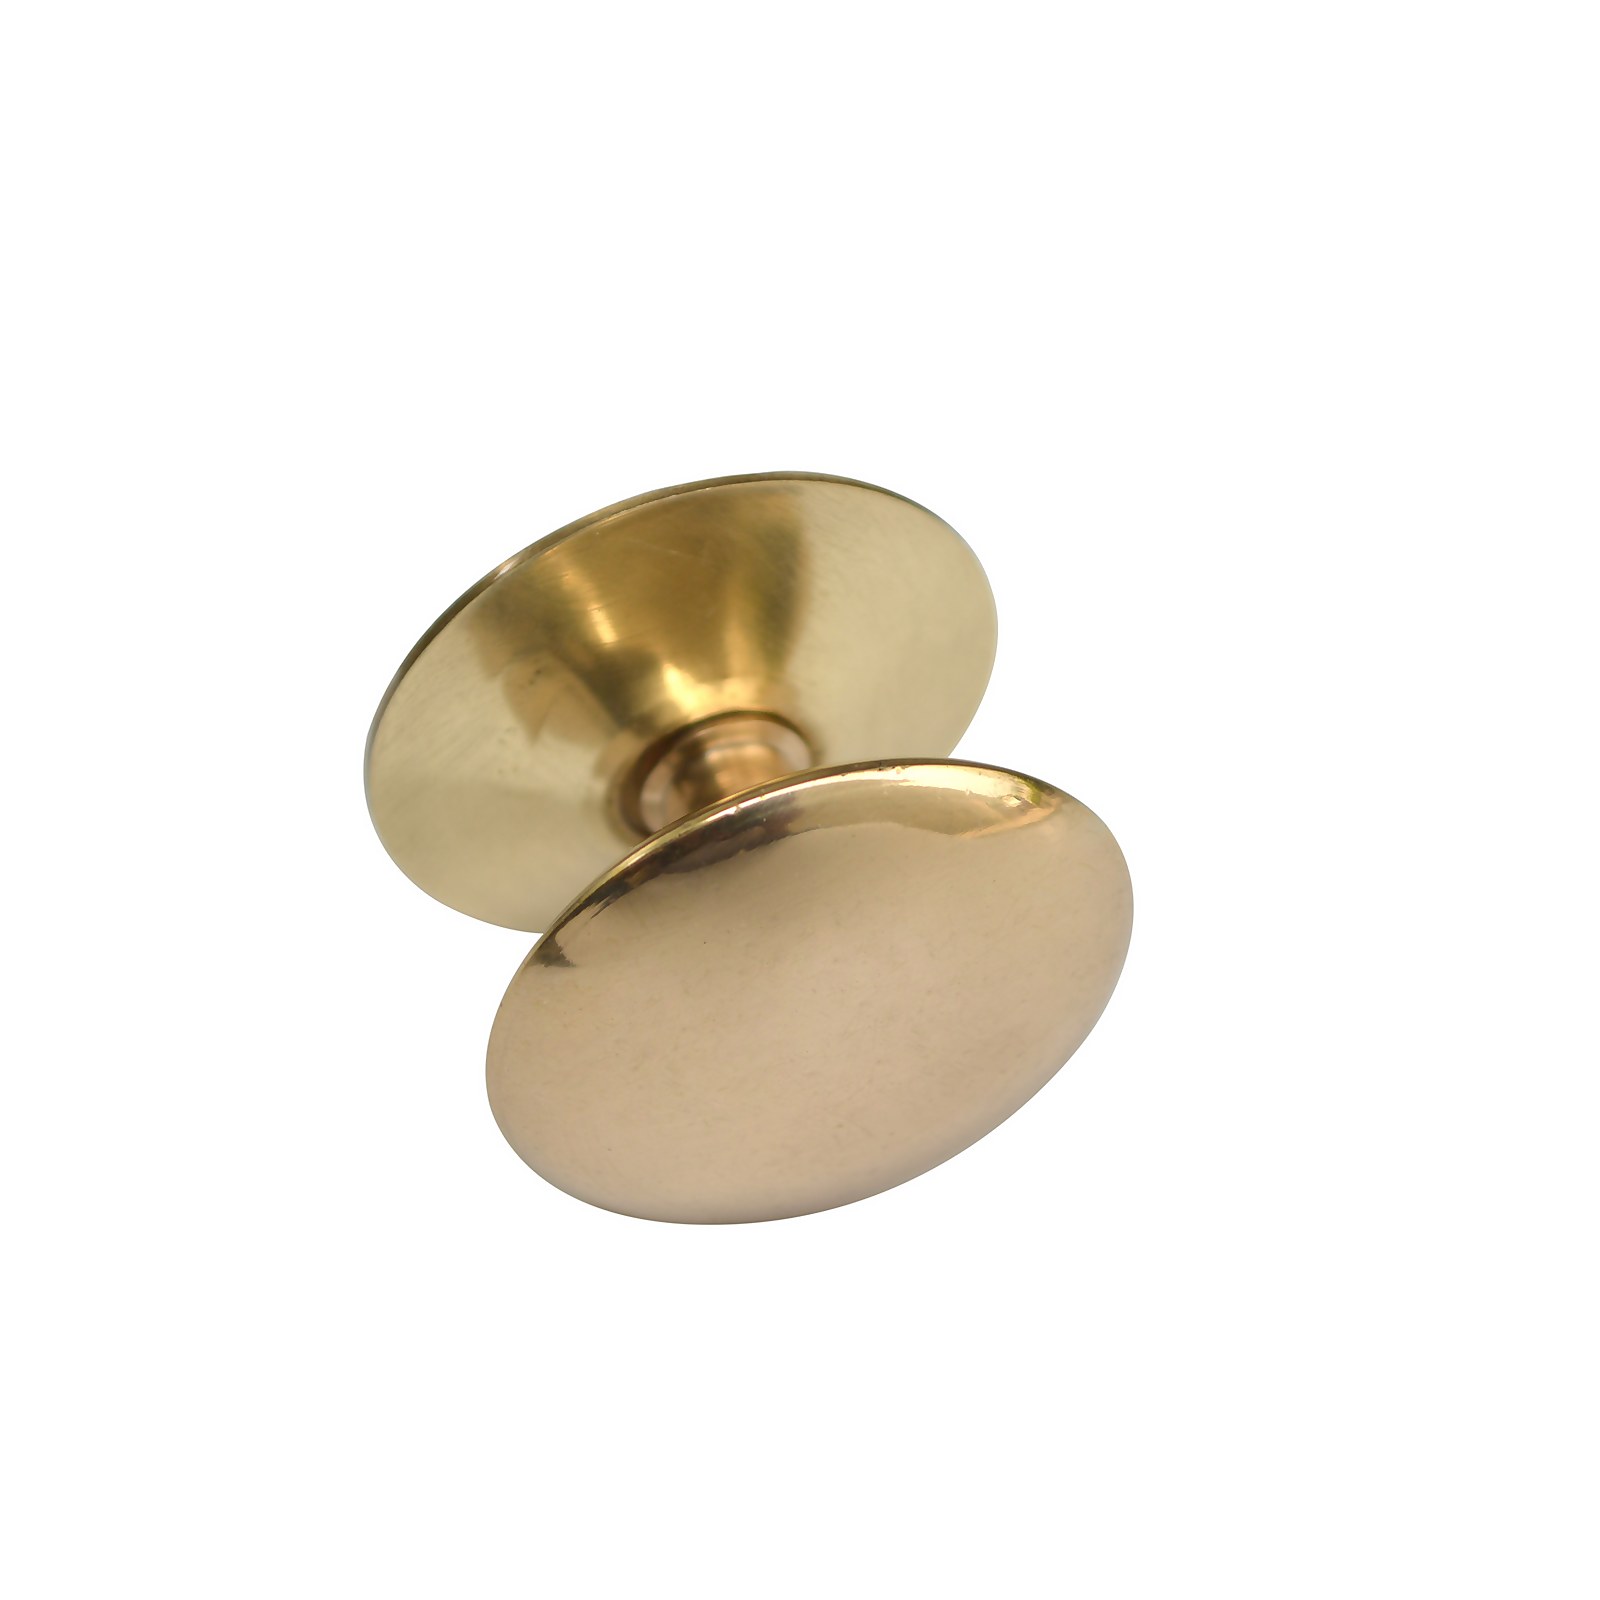 Photo of Victorian 38mm Polished Brass Cabinet Knob - 6 Pack